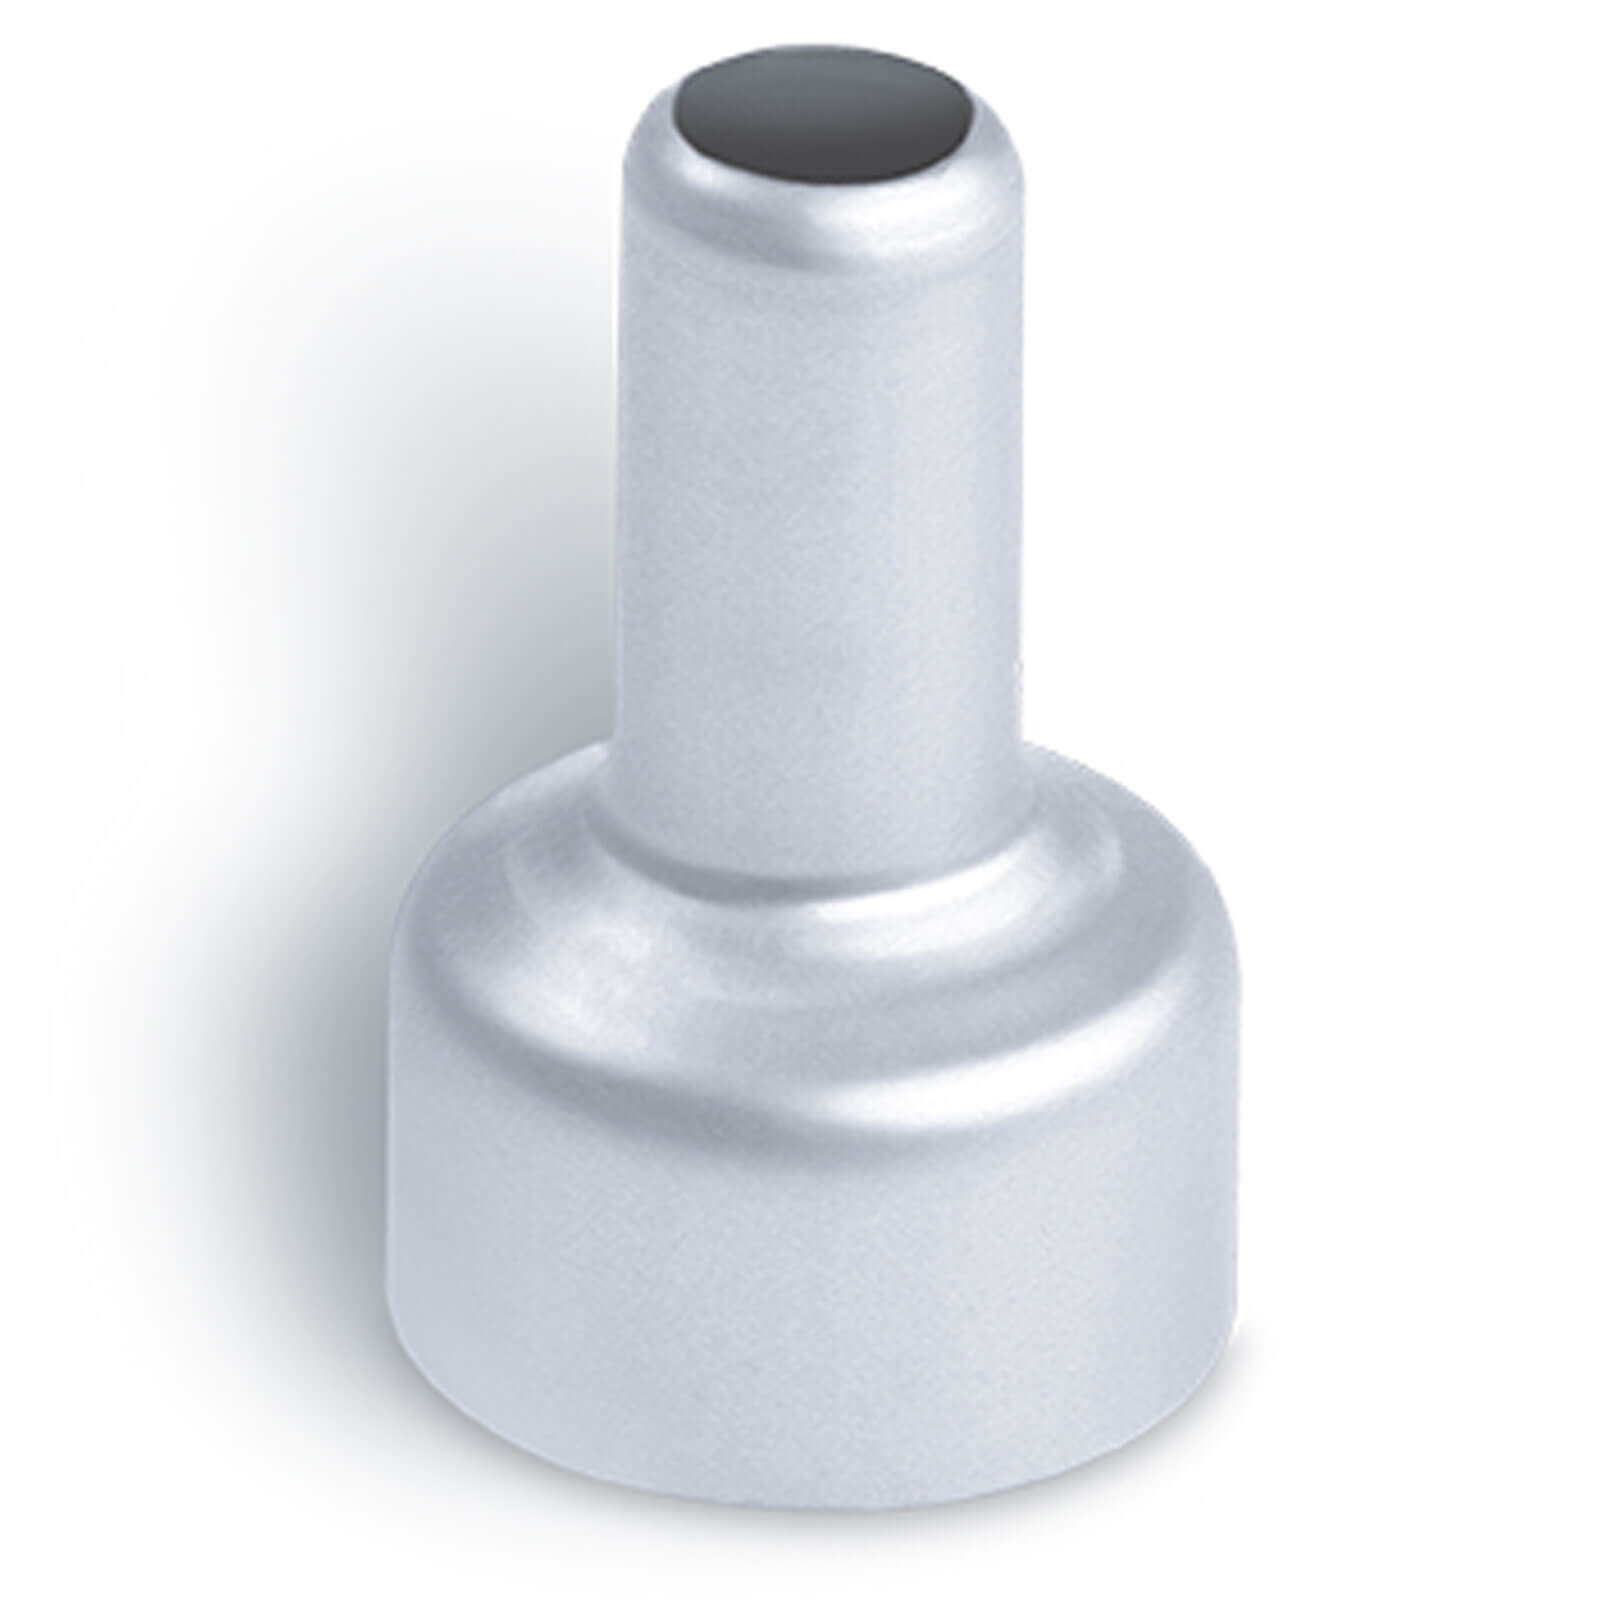 Image of Steinel Reduction Nozzle for HG 350, BHG 360 and HL STICK 7mm